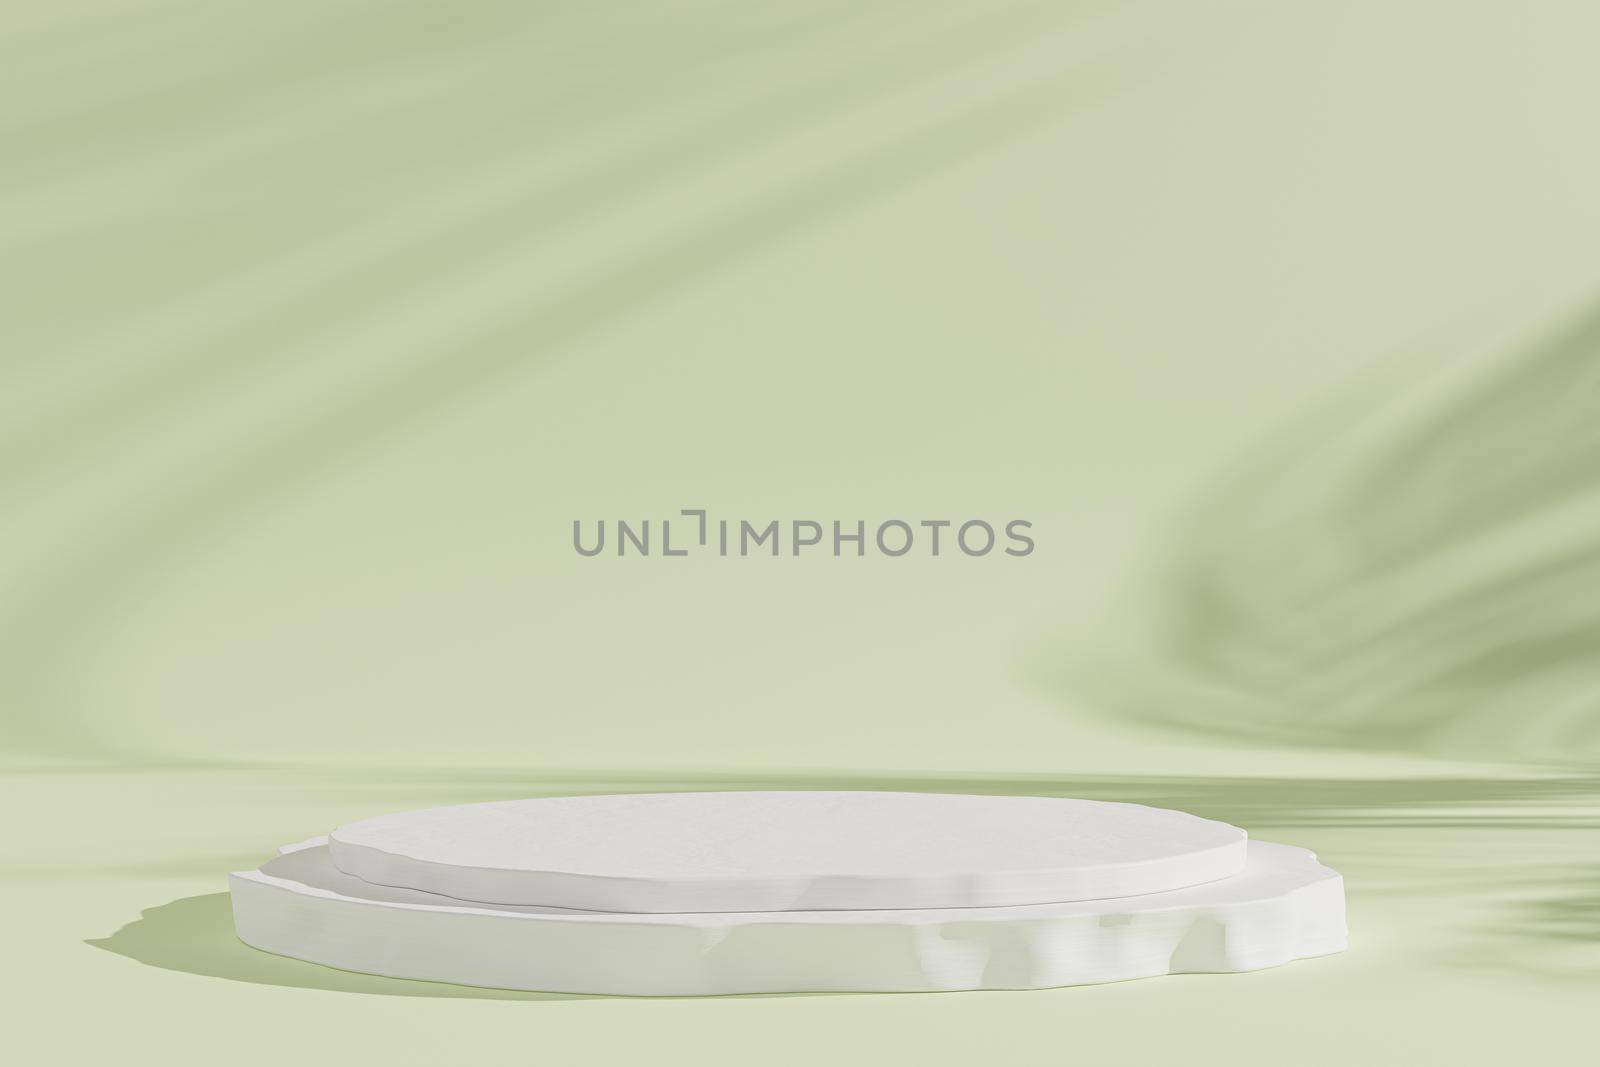 Podium or pedestal for products or advertising on green background with leaves shadows, minimal 3d illustration render